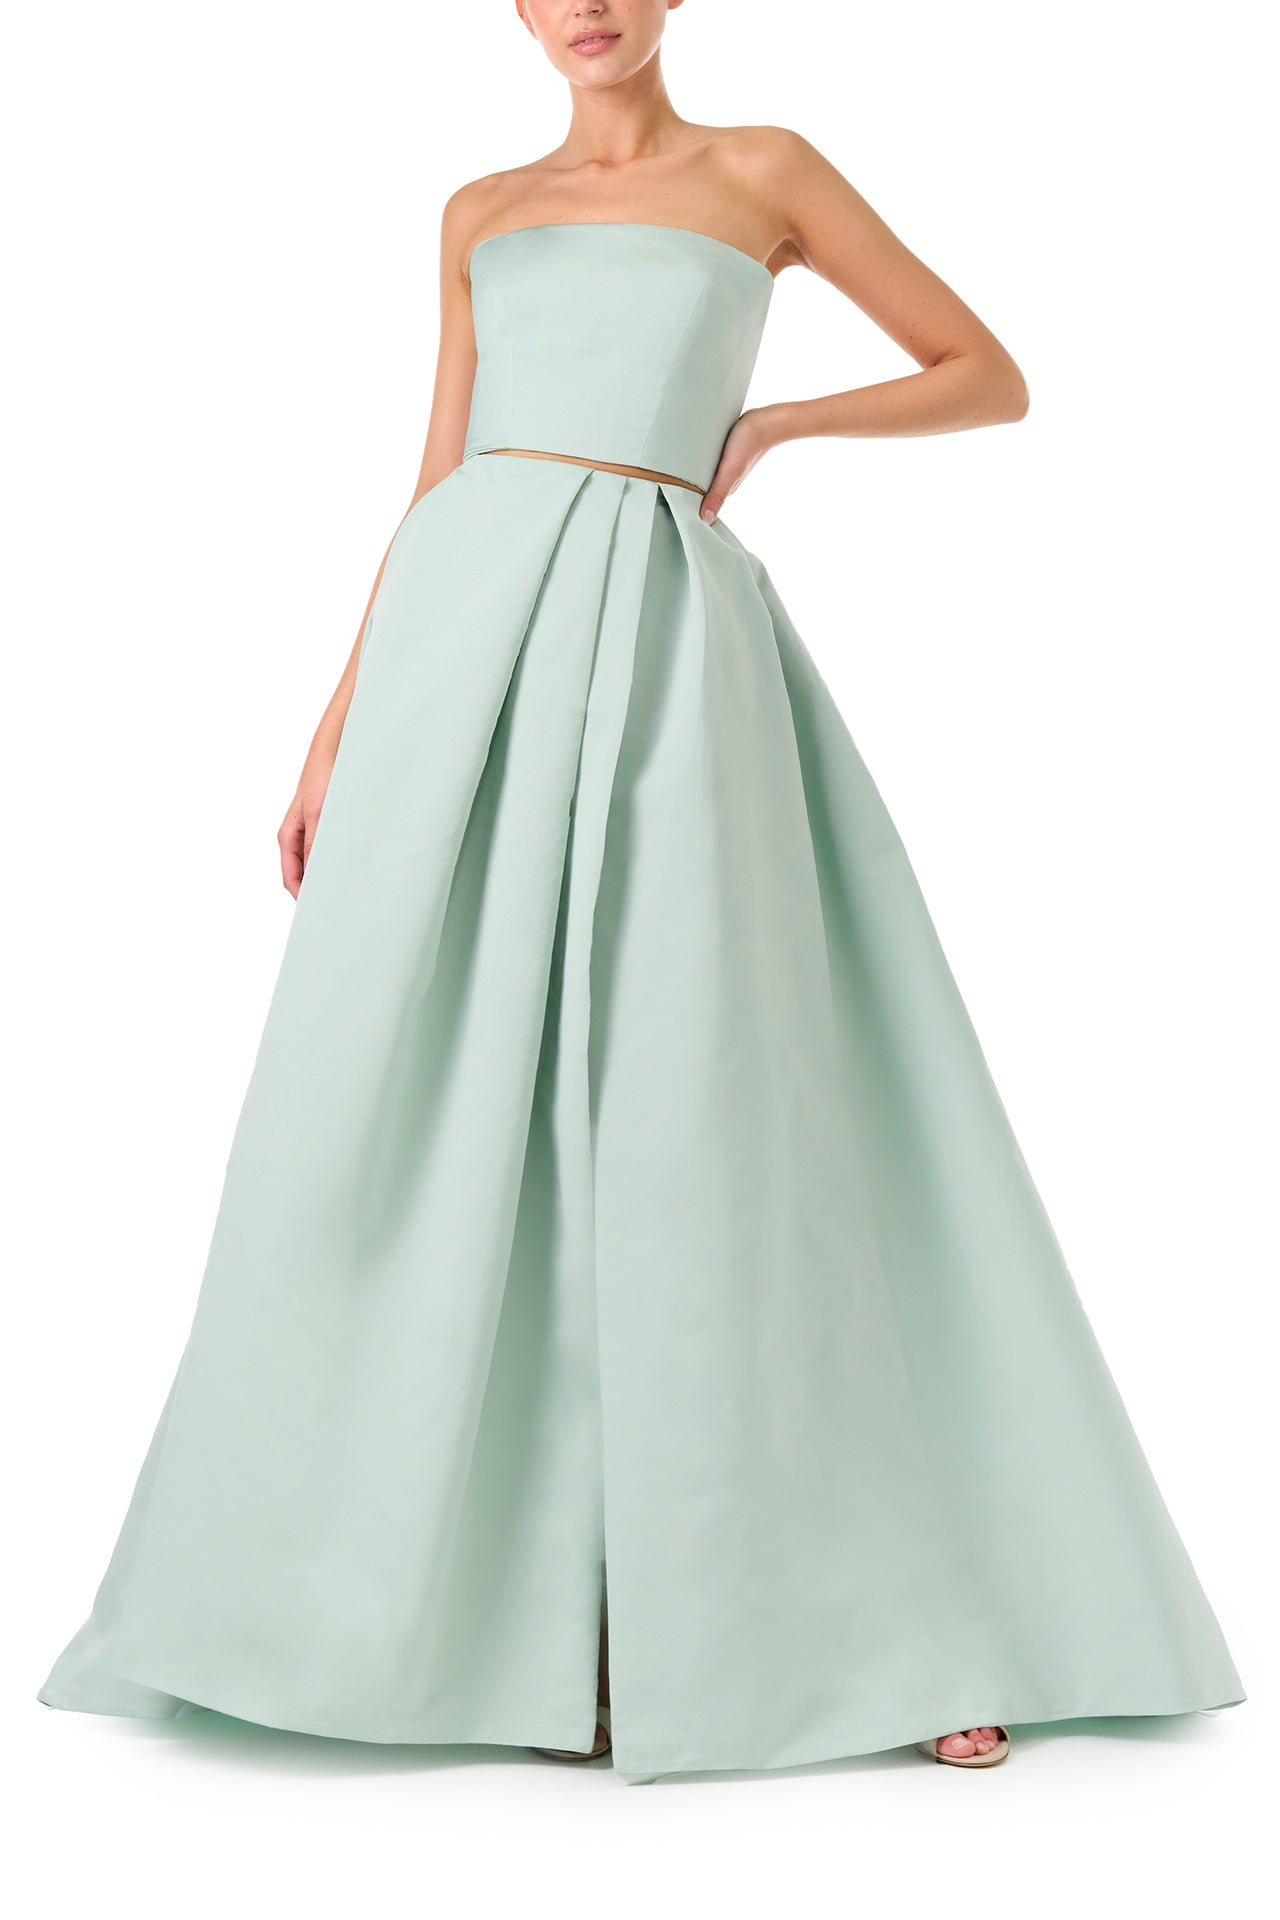 Monique Lhuillier Spring 2023 ball skirt with front slit in pistachio silk faille fabric - front.